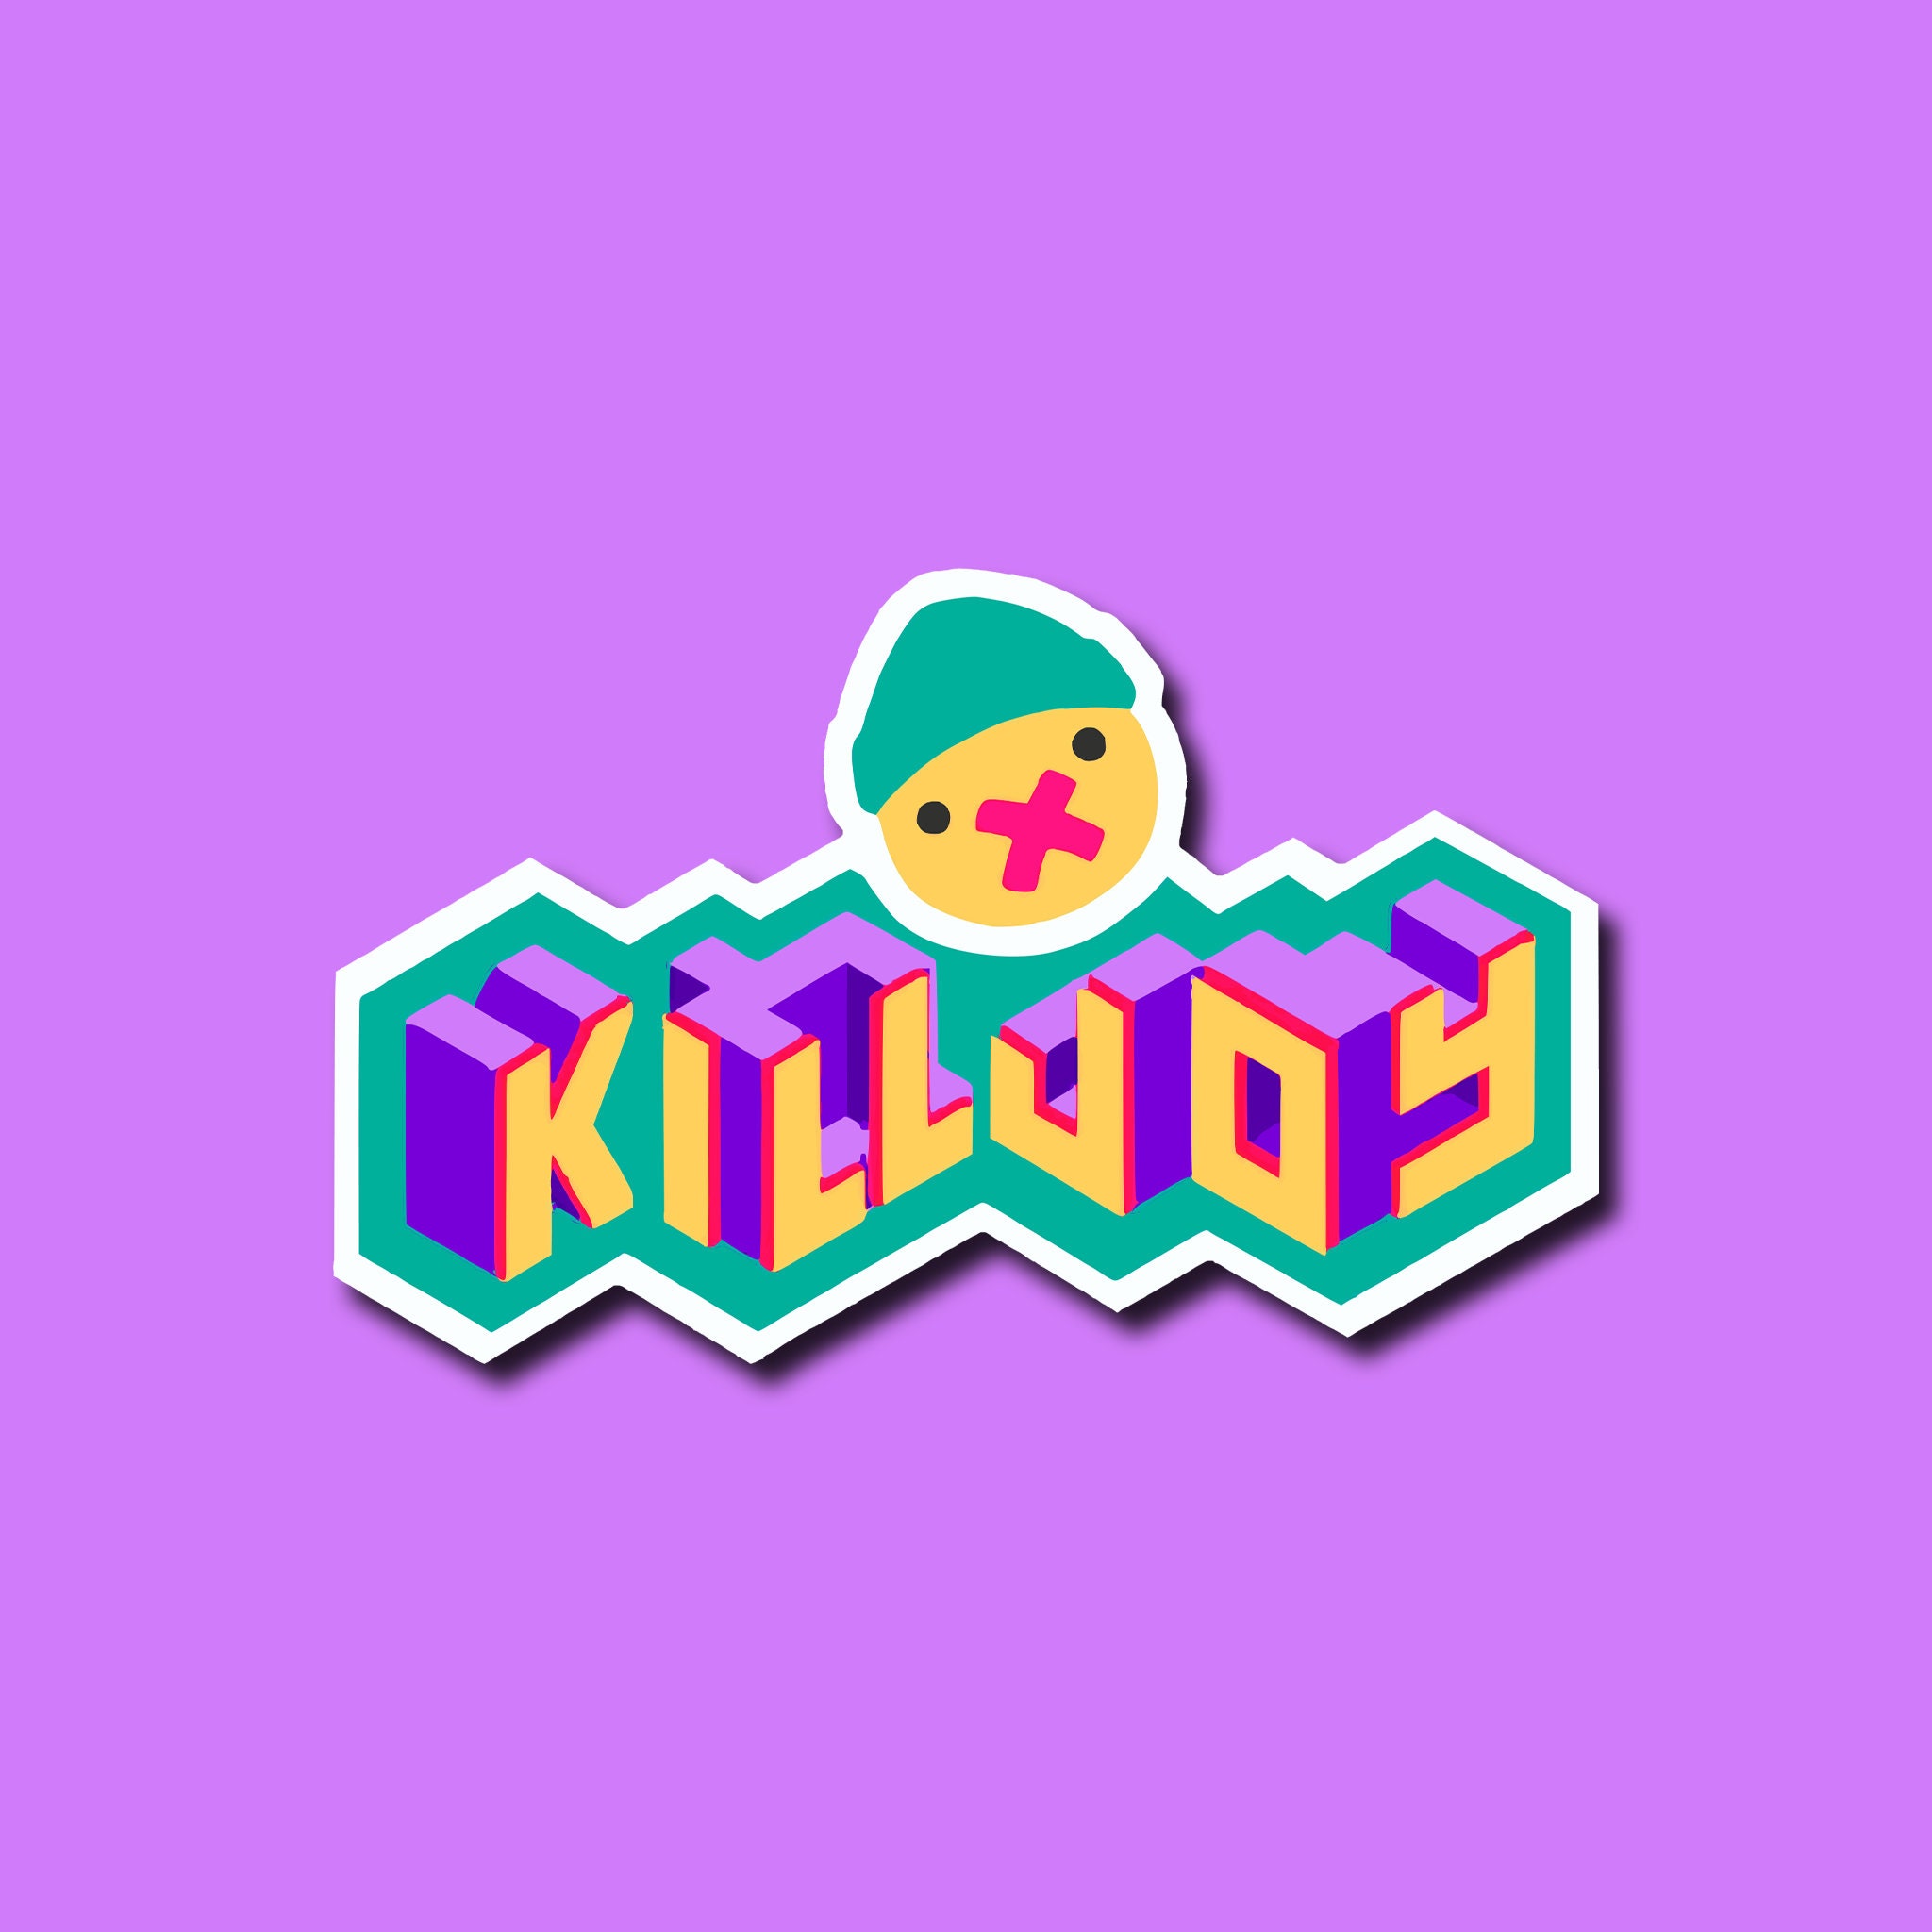 KillJoy: a HALO-inspired sticker and the best skin for craft